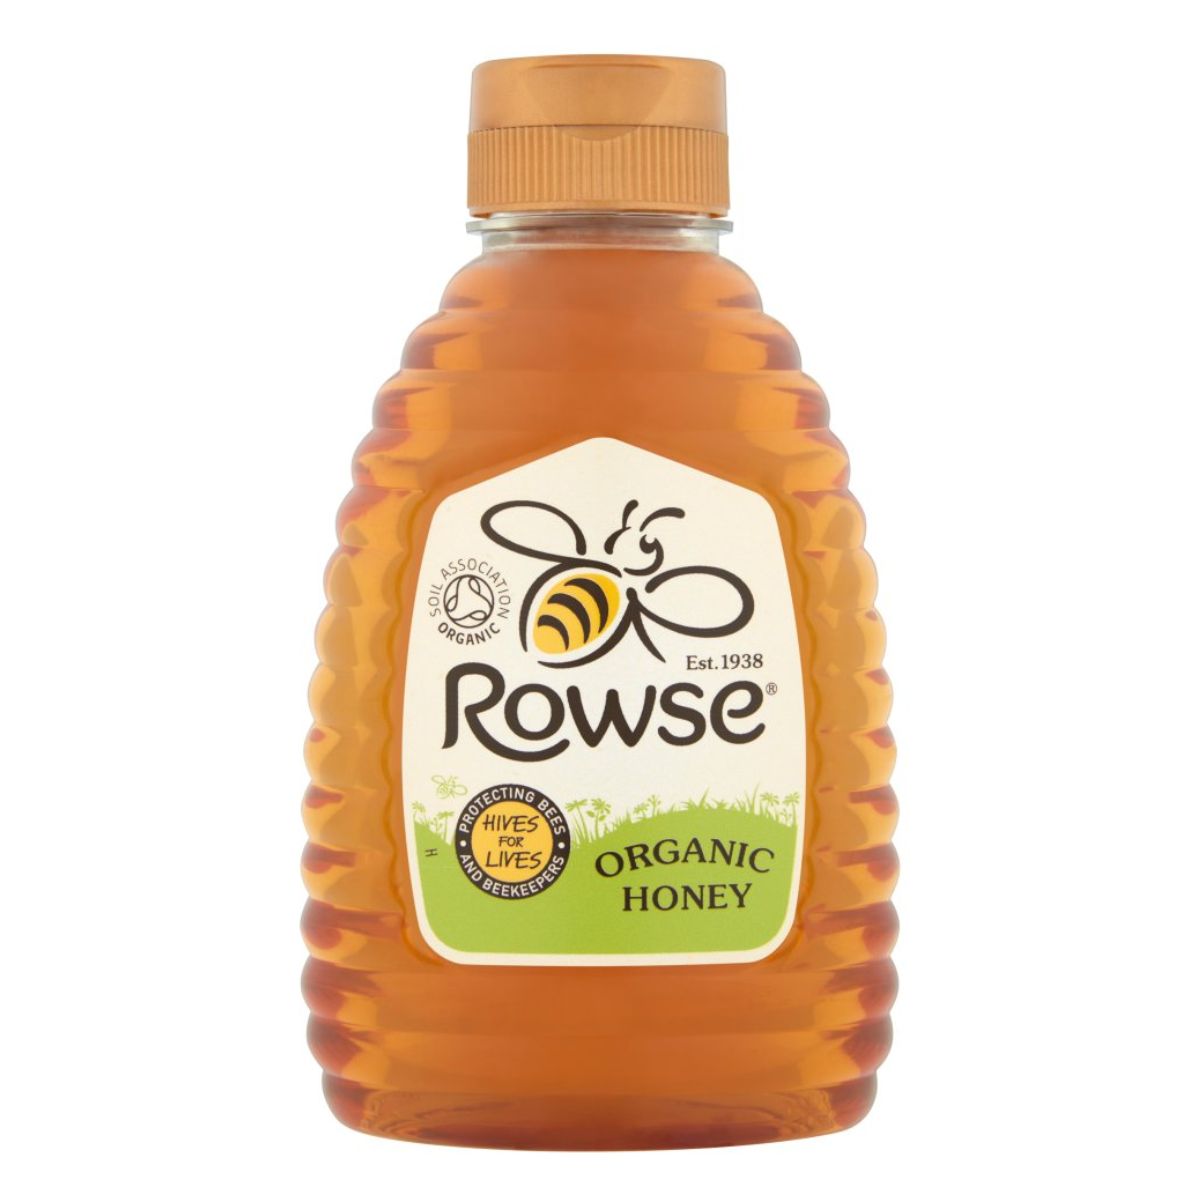 A bottle of Rowse - Organic Honey - 340g on a white background.